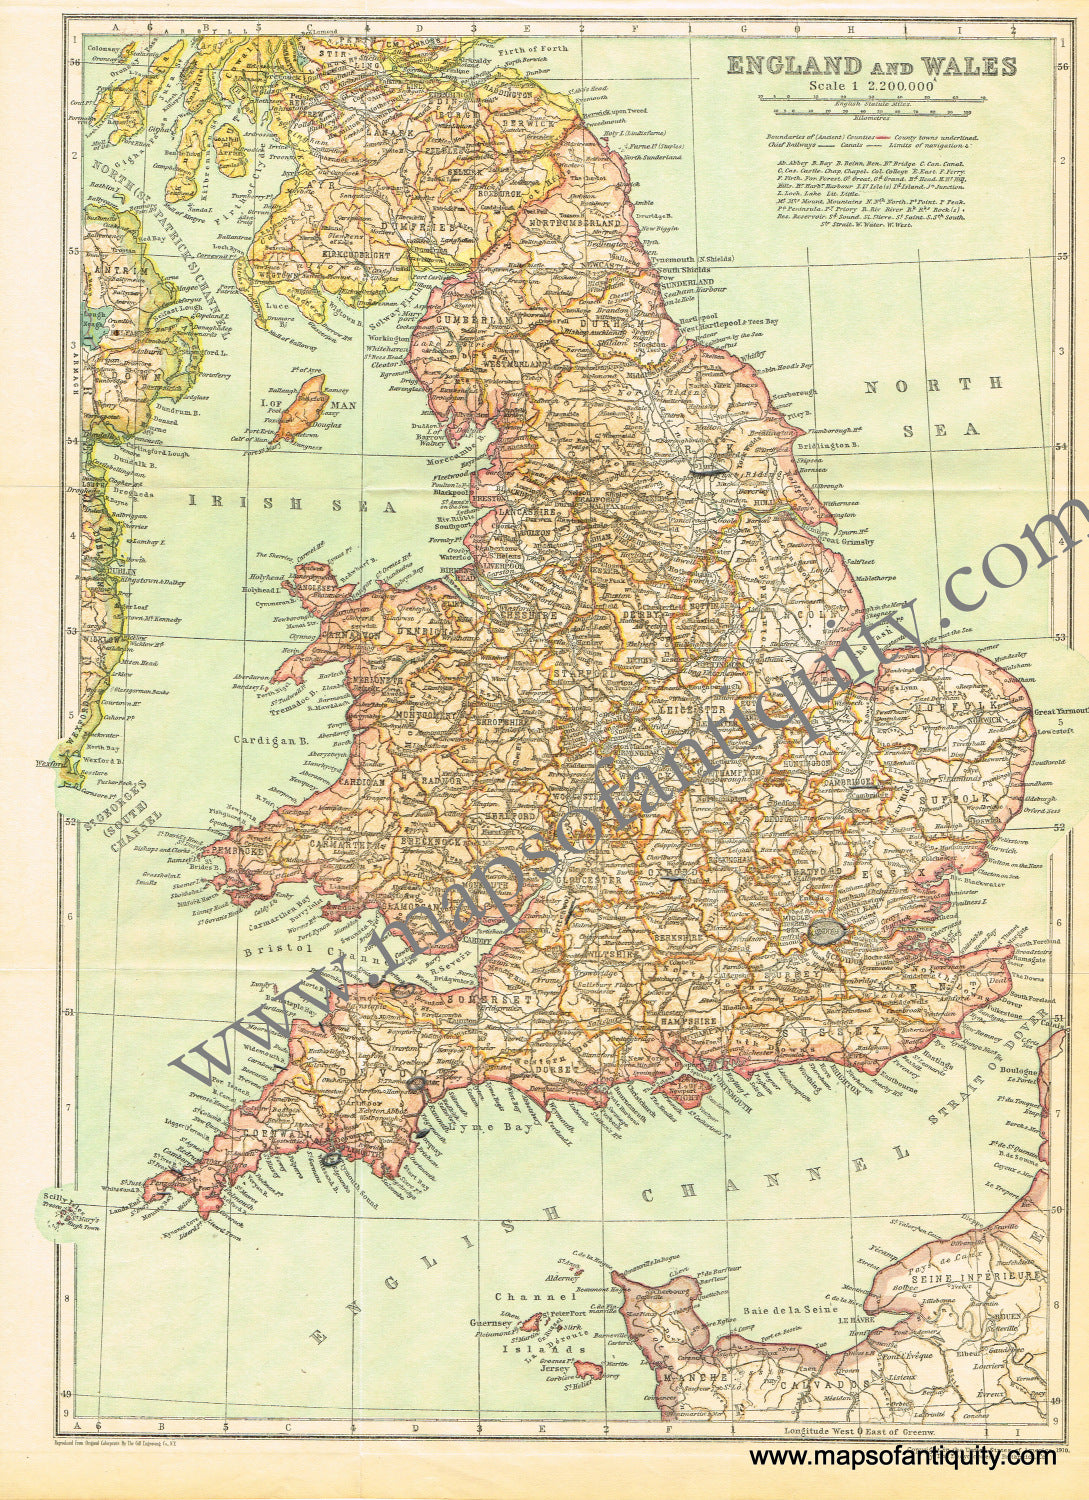 Antique-Printed-Color-Map-England-and-Wales-Europe-England-1910-Encyclopaedia-Britannica-Maps-Of-Antiquity